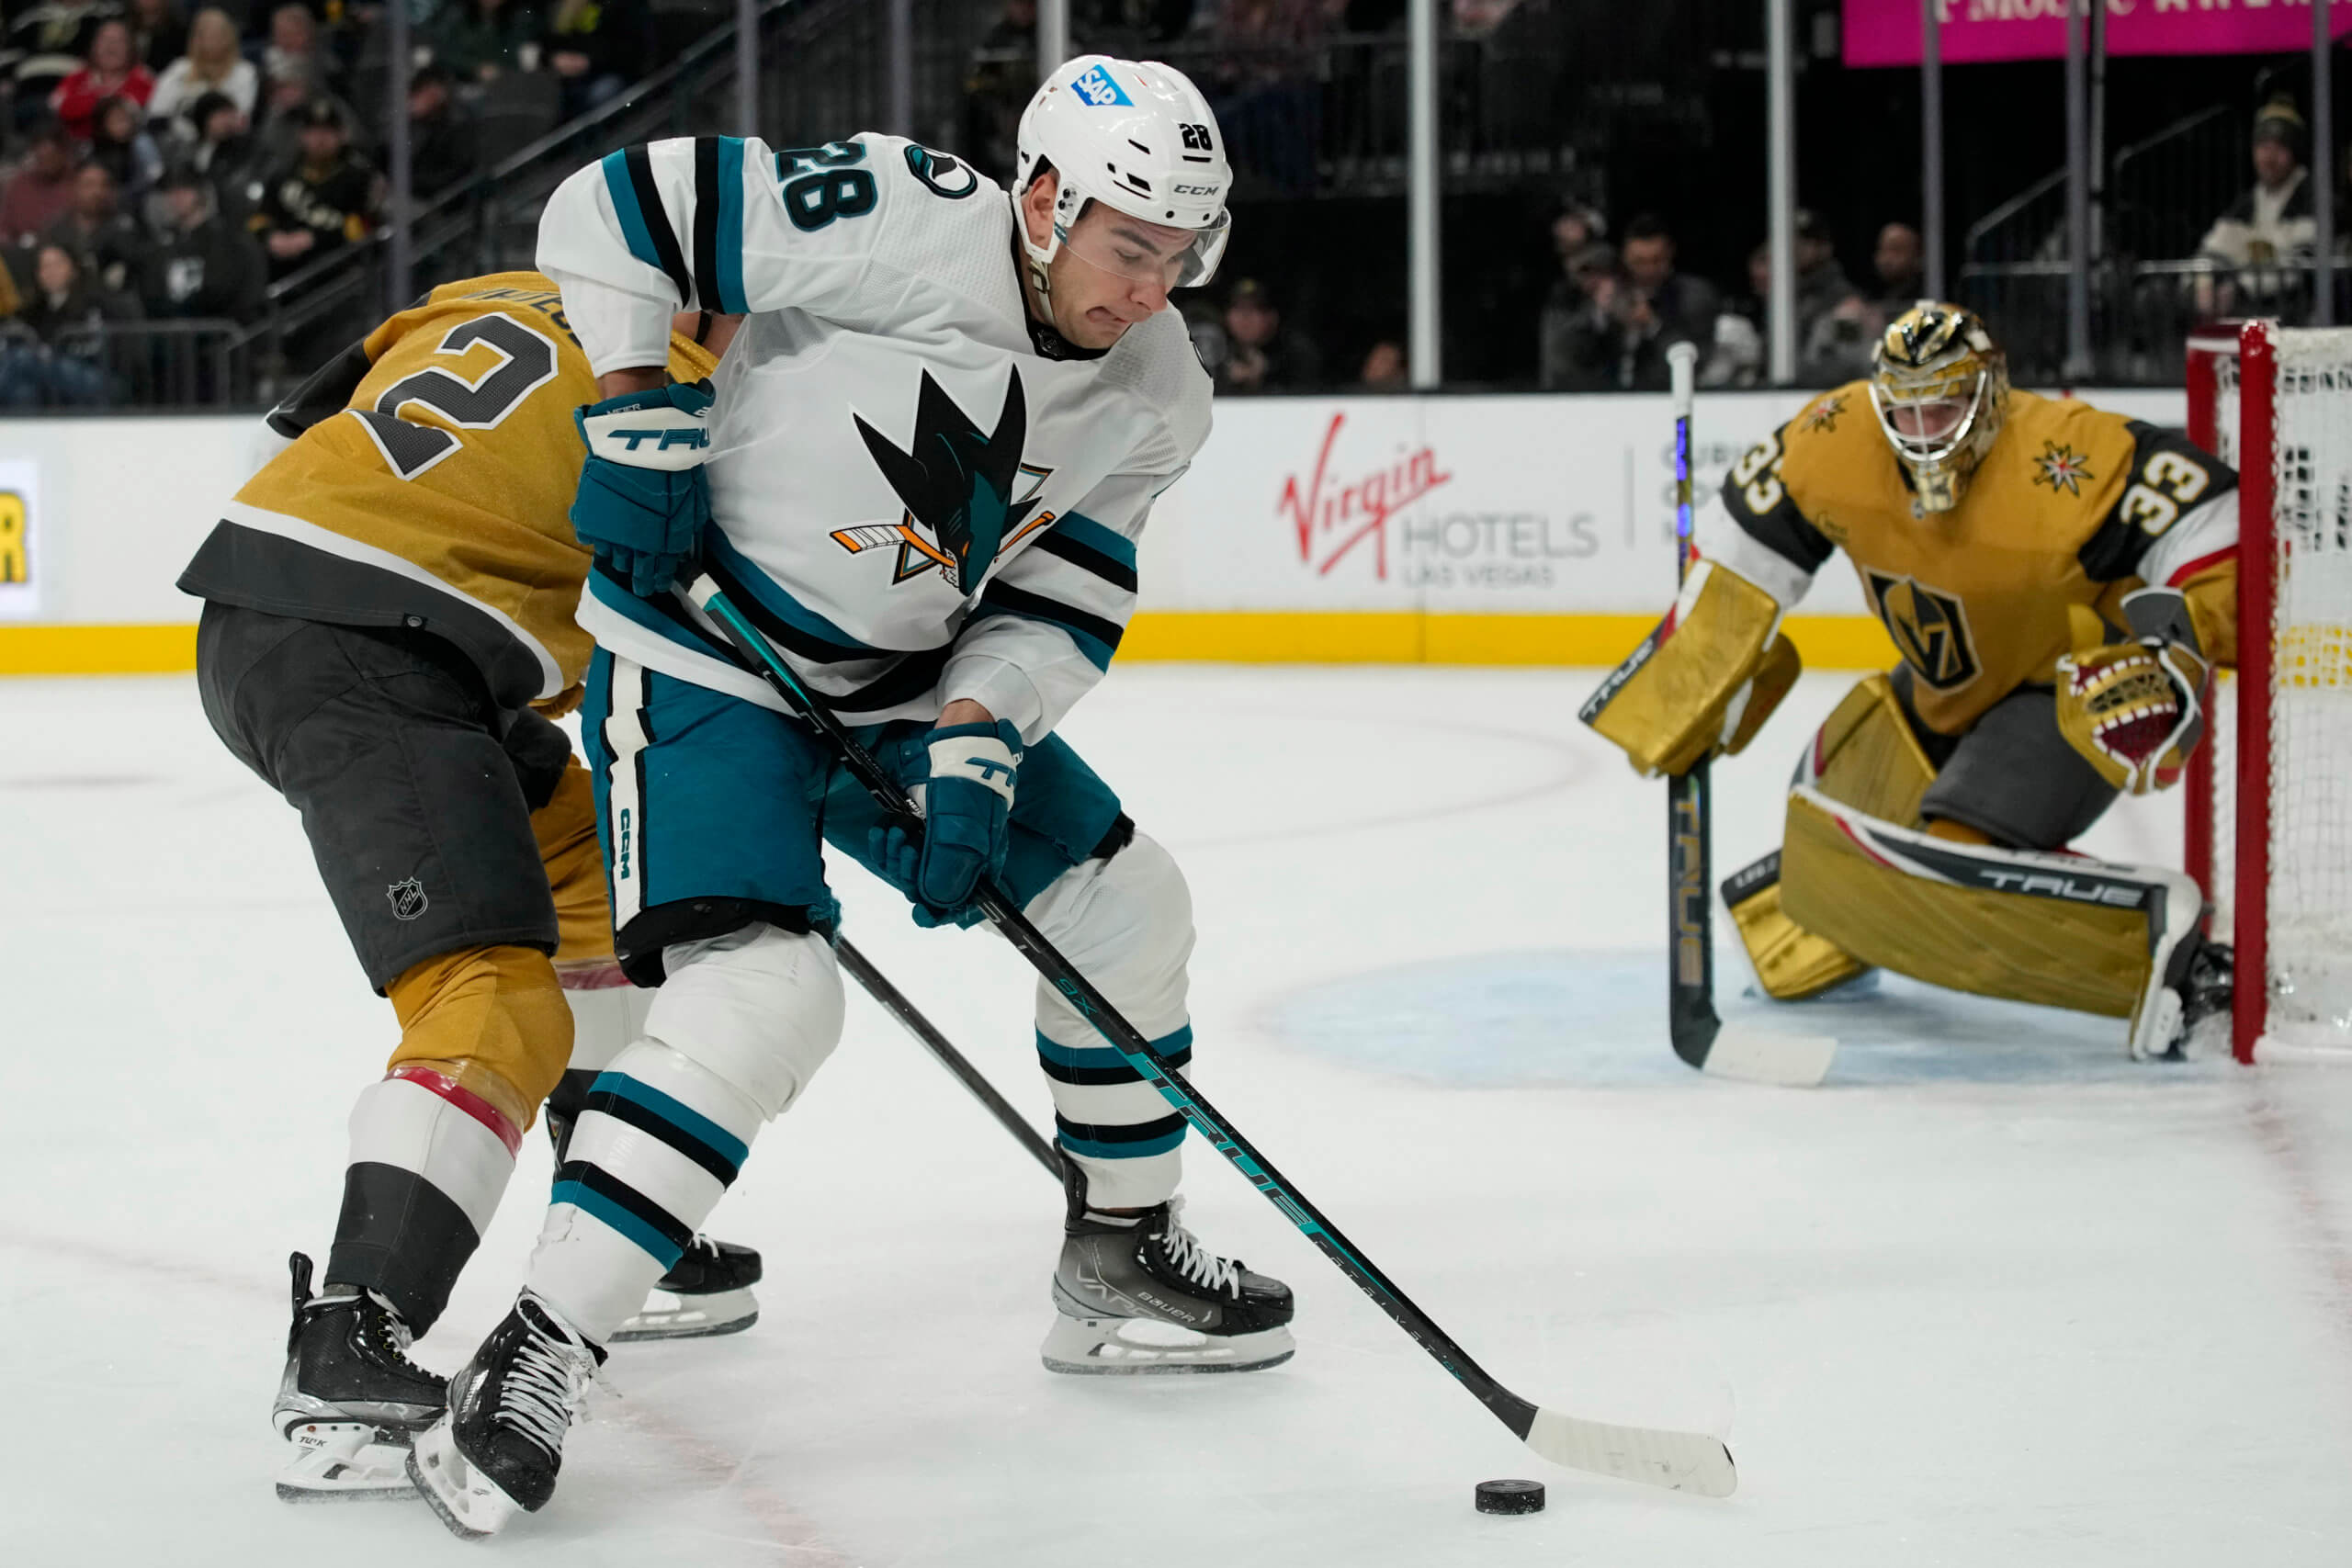 NHL - First look at Timo Meier as a member of the New